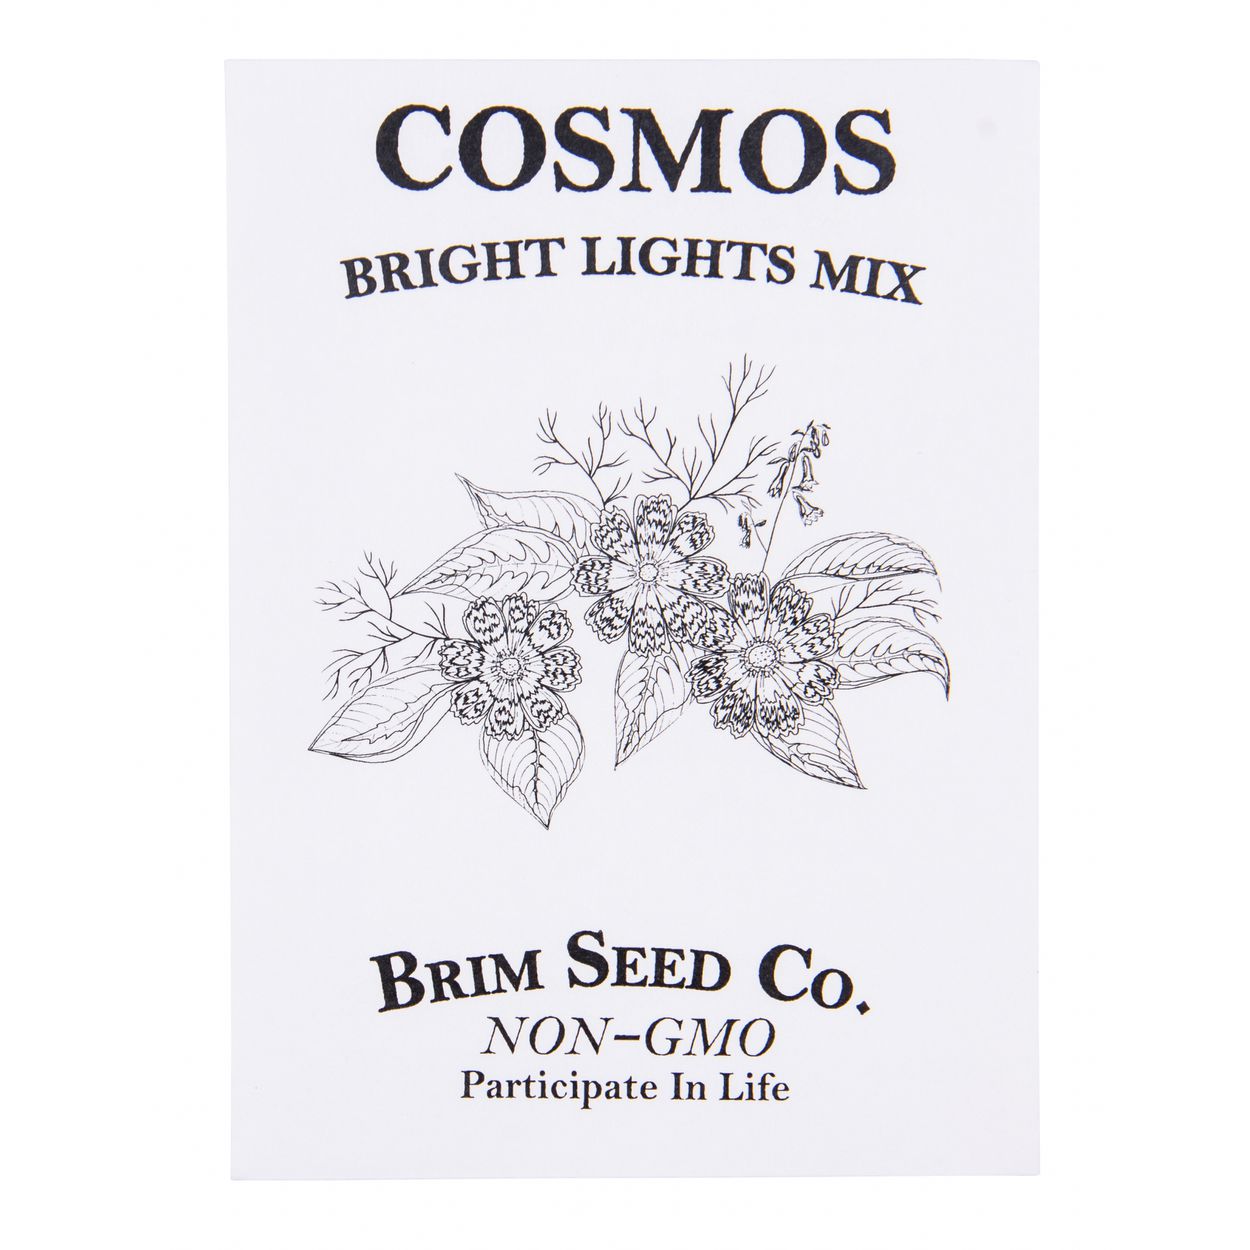 Brim Seed Co. - Bright Lights Mix Cosmos Flower Seed